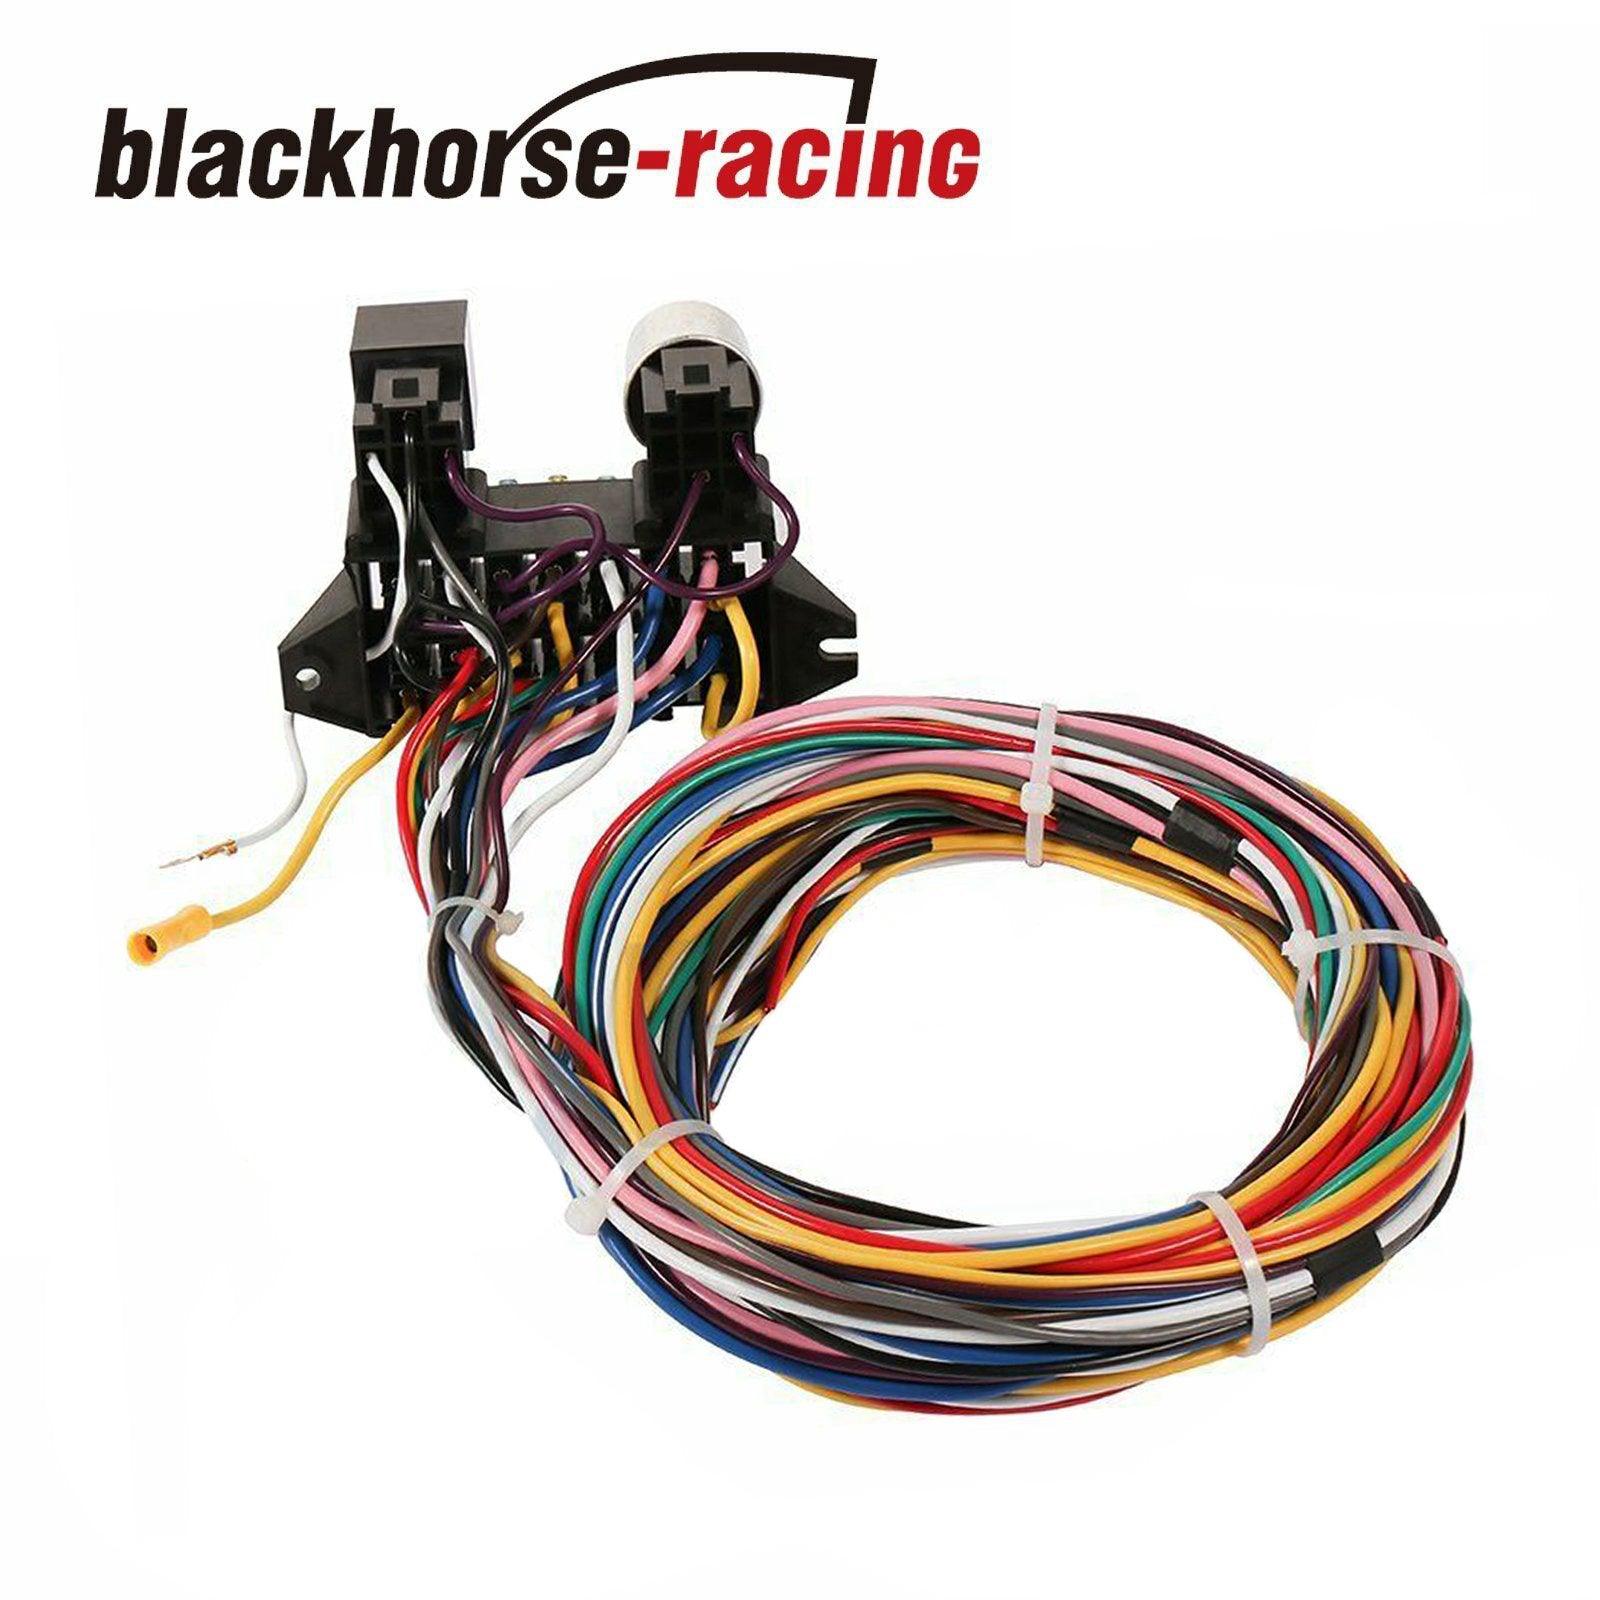 NEW 12 CIRCUIT WIRE HARNESS MUSCLE CAR HOT ROD STREET ROD XL WIRES UNI